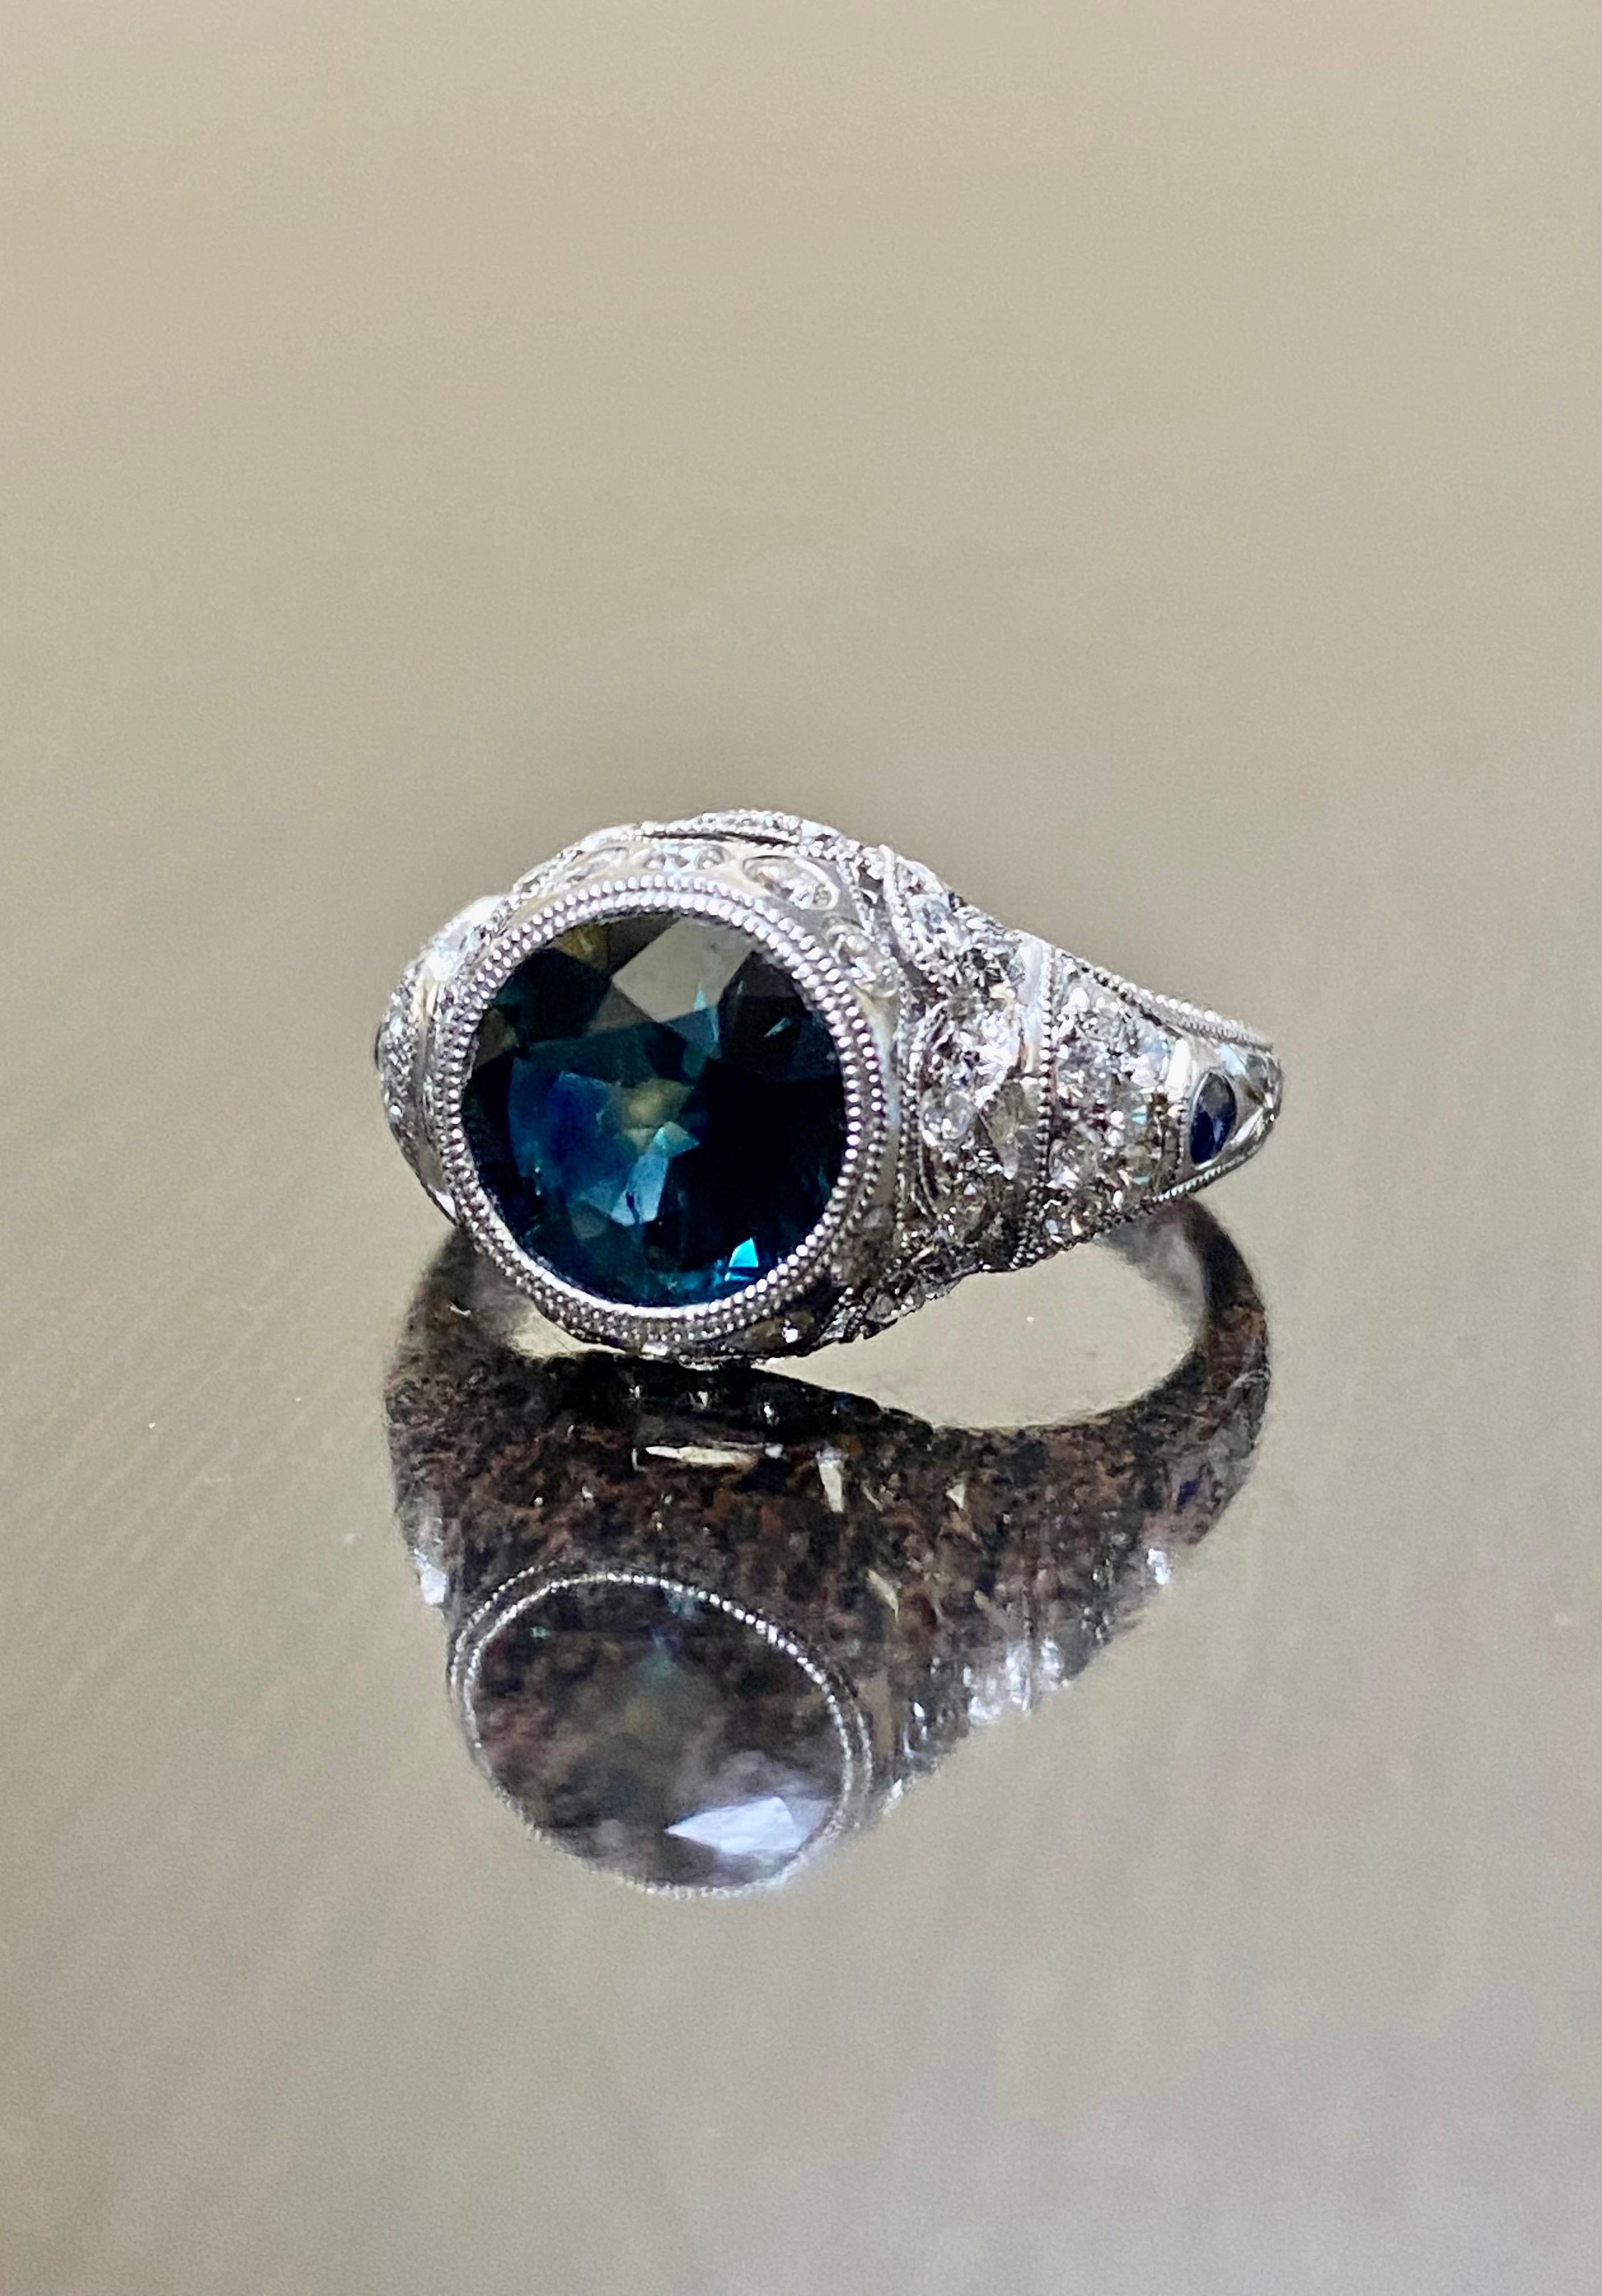 DeKara Designs Collection

Metal- 14K Yellow Gold, .583.

Stones- Center 1 Round Peacock Blue Sapphire 2.25 Carats, 2 Round Sapphire 0.05 Carats, 40 Diamonds G Color VS2 Clarity, 0.72 Carats.

Size- 6.  FREE SIZING!!!!

Beautifully handmade and hand